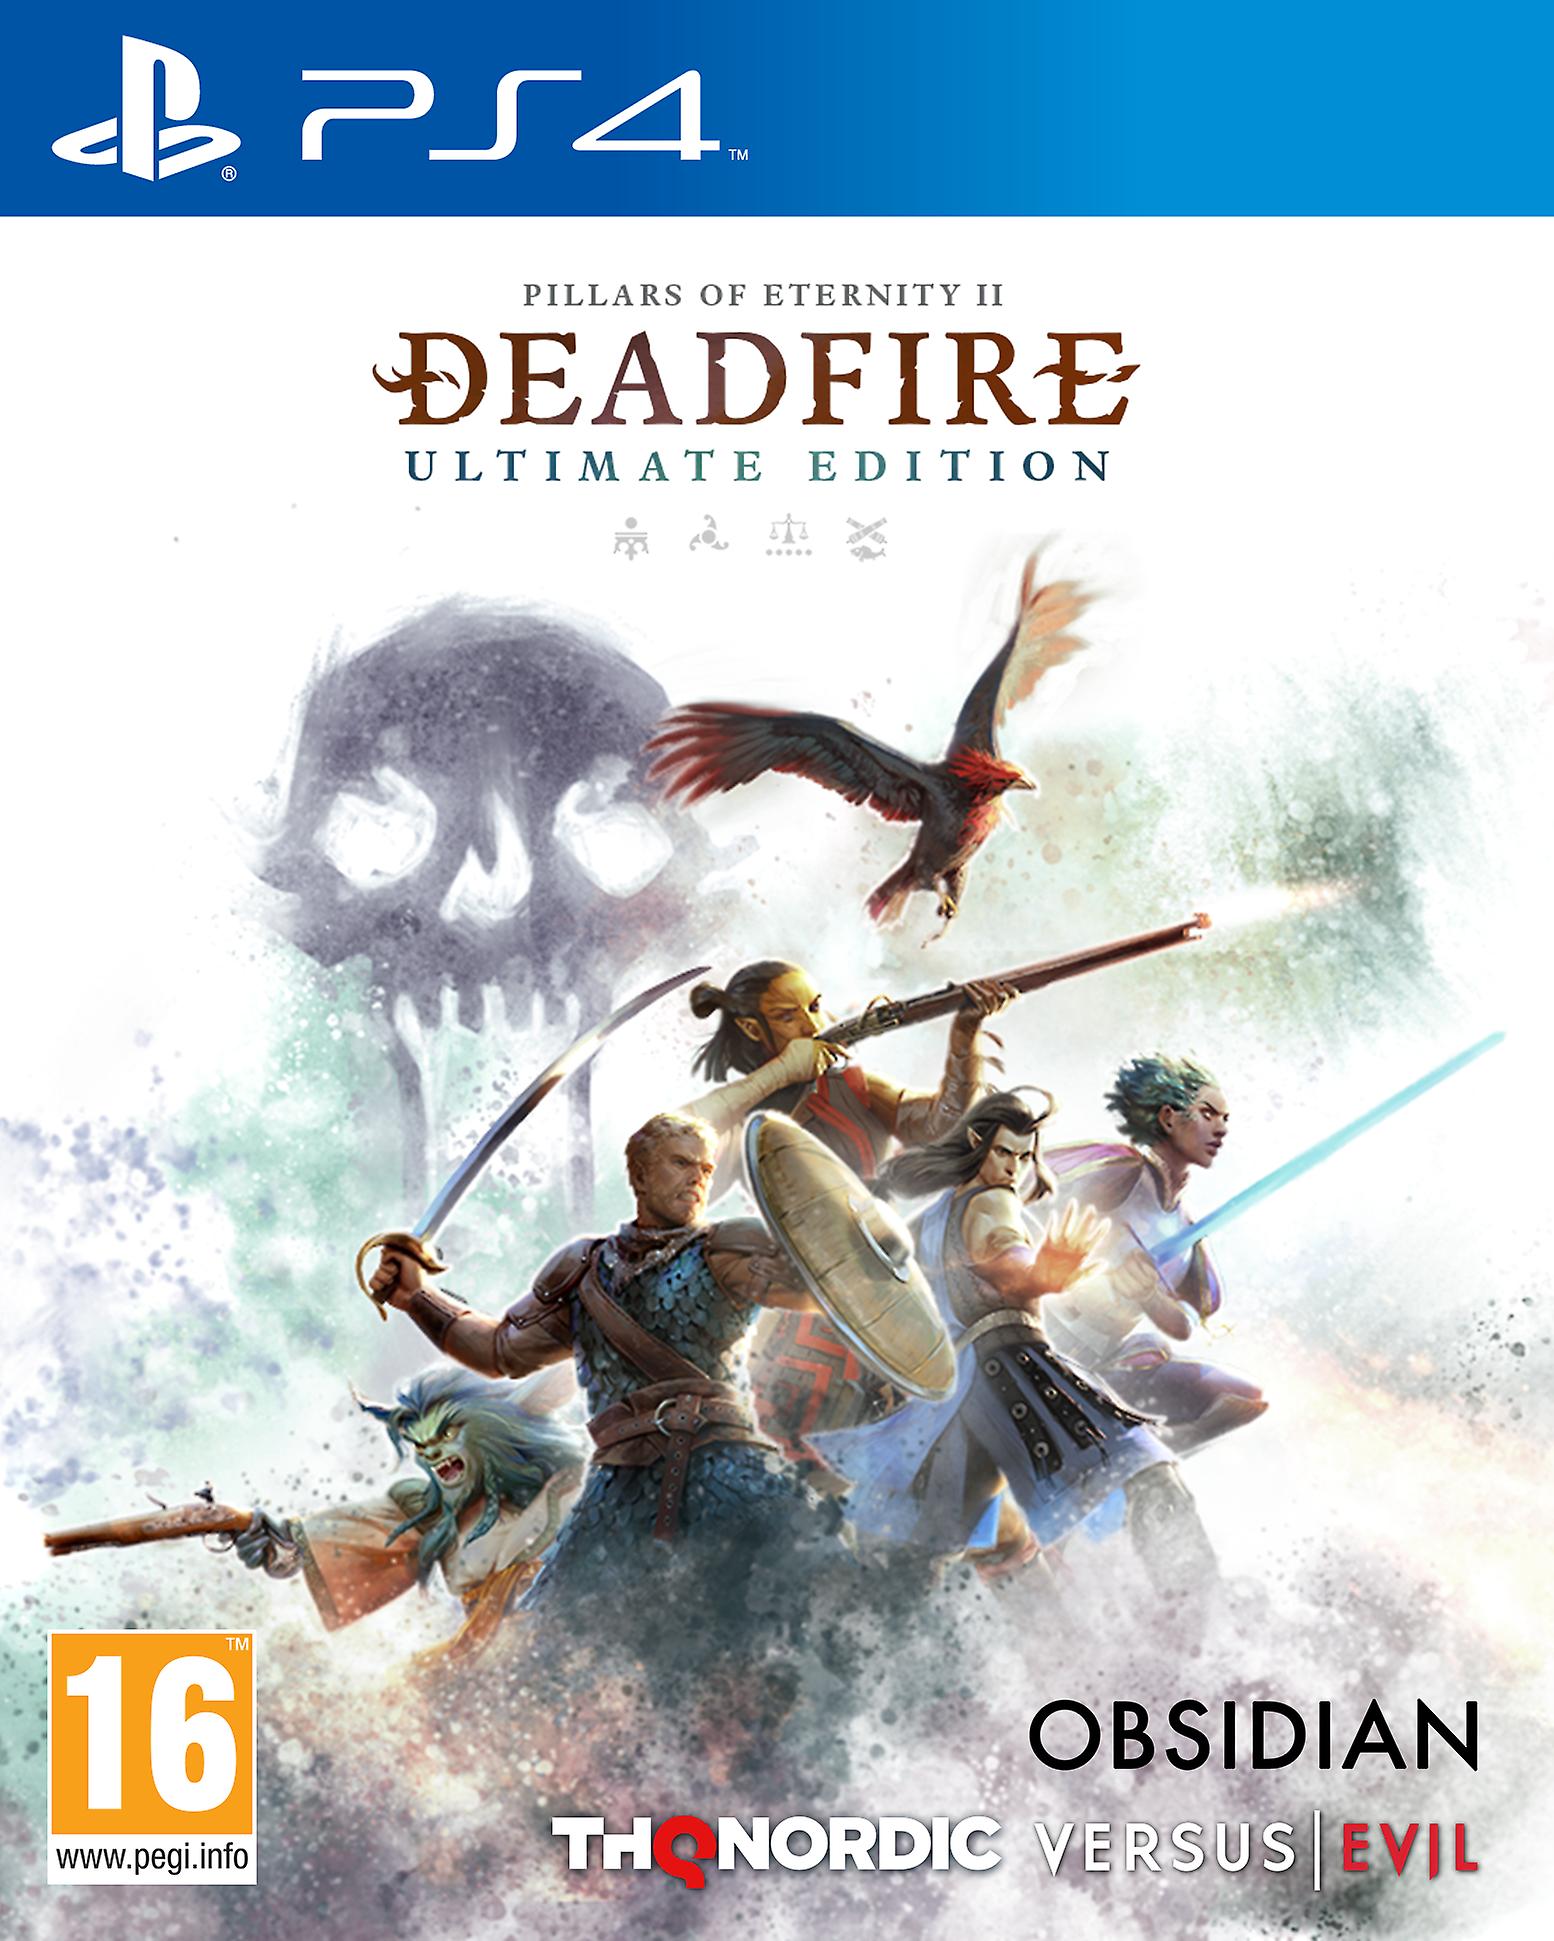 Pillars of Eternity II: Deadfire - Ultimate Edition [PS4] 5.05 / 6.72 / 7.02 / 7.55 [EUR] (2020) [Русский] (v1.05)